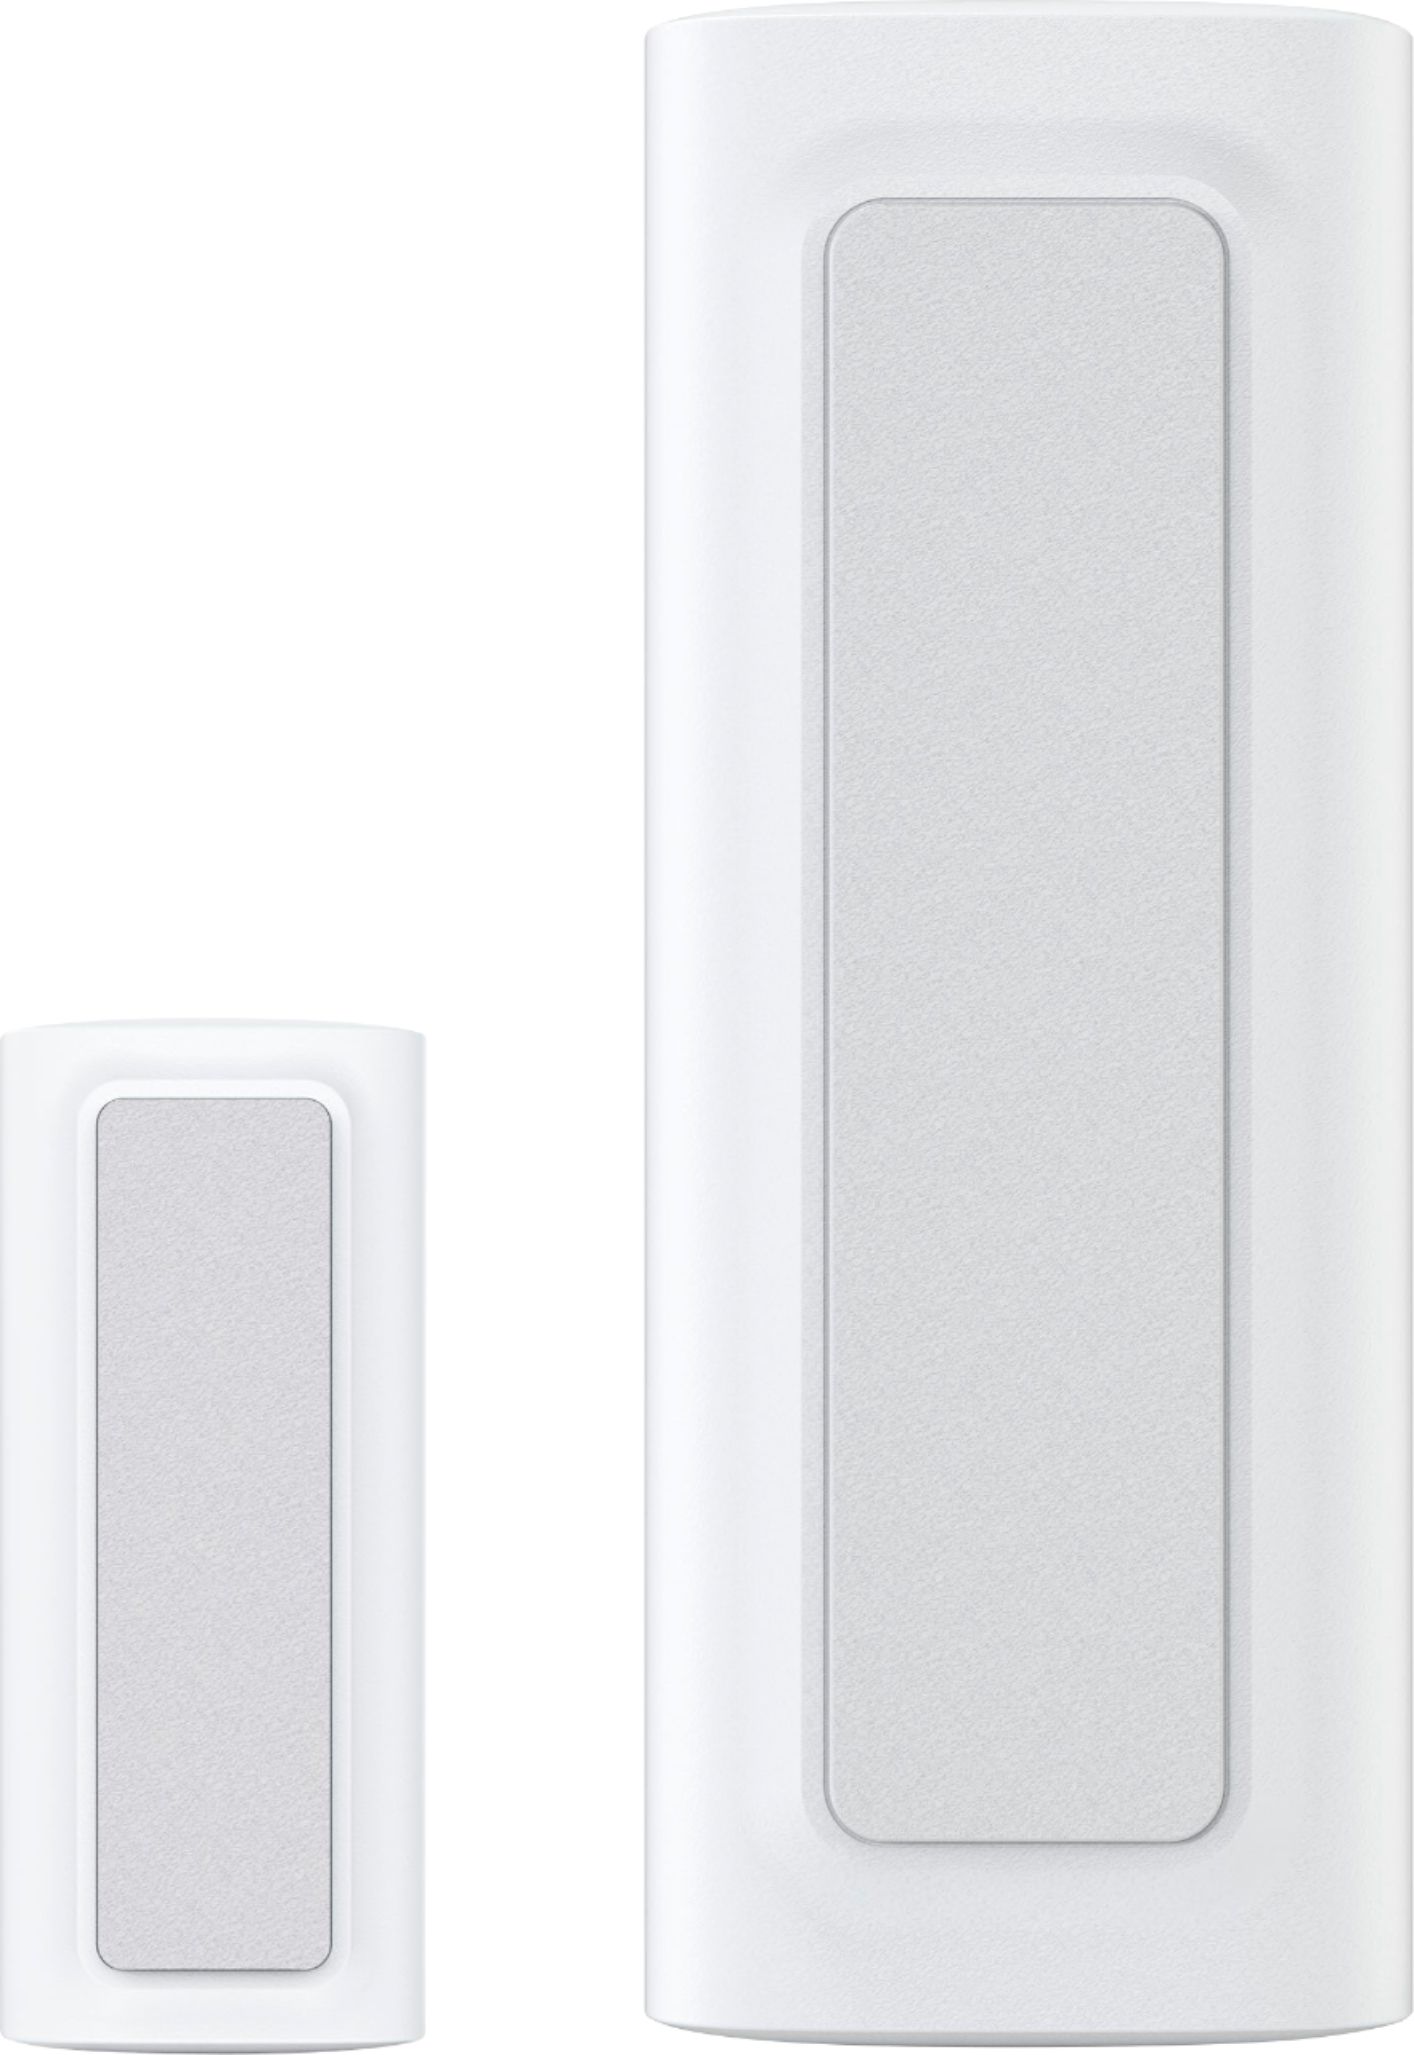 Angle View: eufy Security - Smart Home Security Entry Sensor Add-on - White